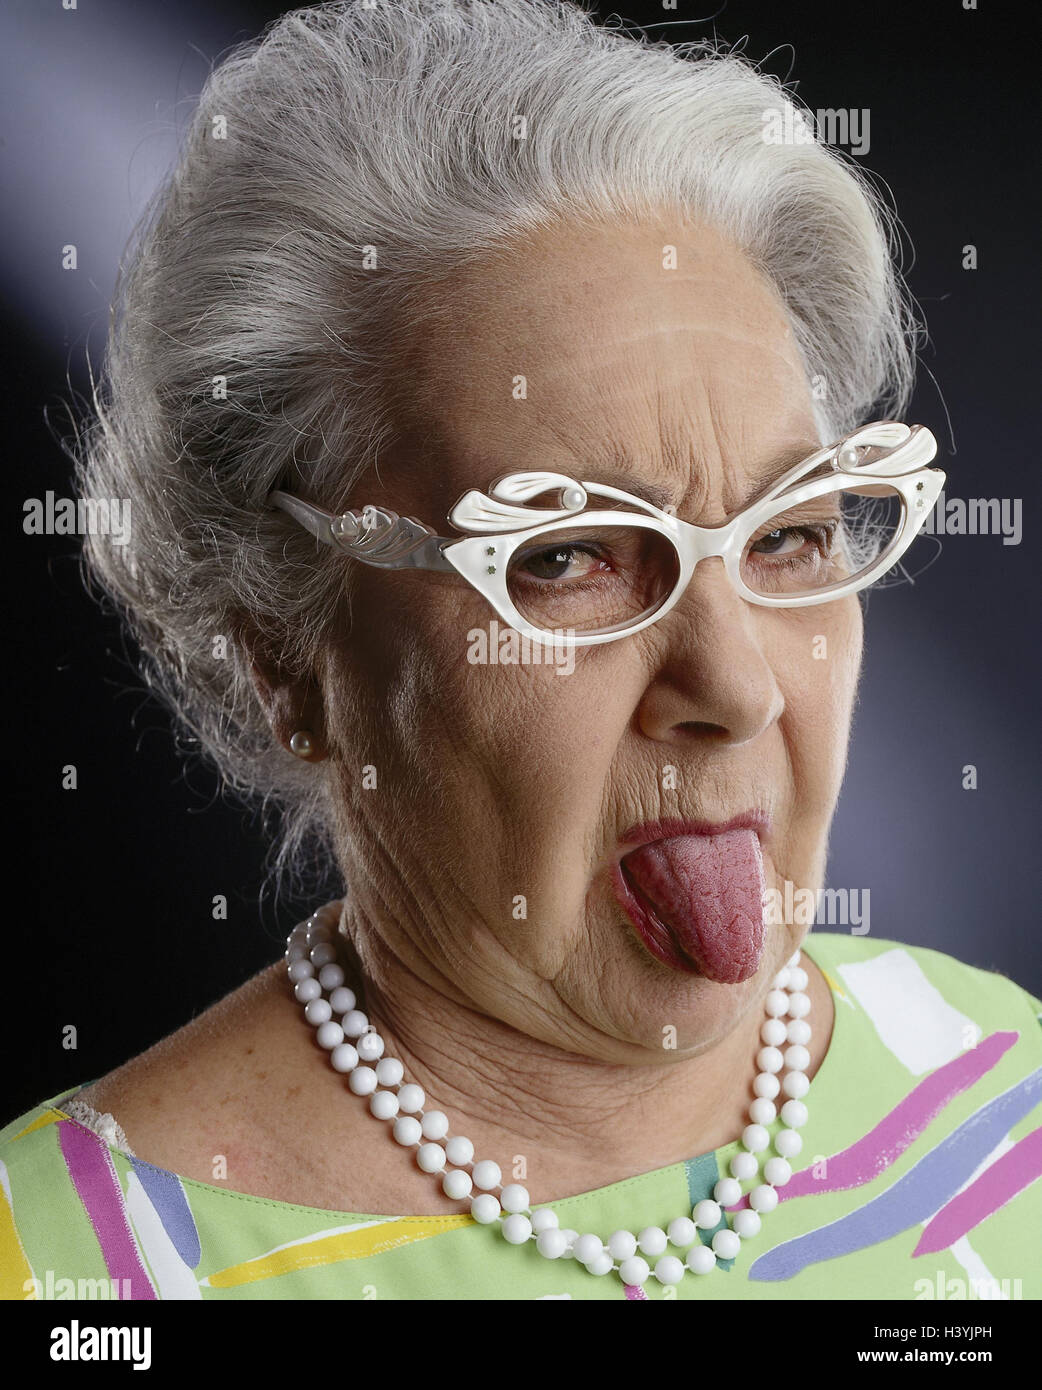 Senior, glasses, facial play, tongue Rau's passages pensioner, woman, old, grey-haired, visual help, pearl necklace, T-shirt, cheeky, insults, decency Stock Photo